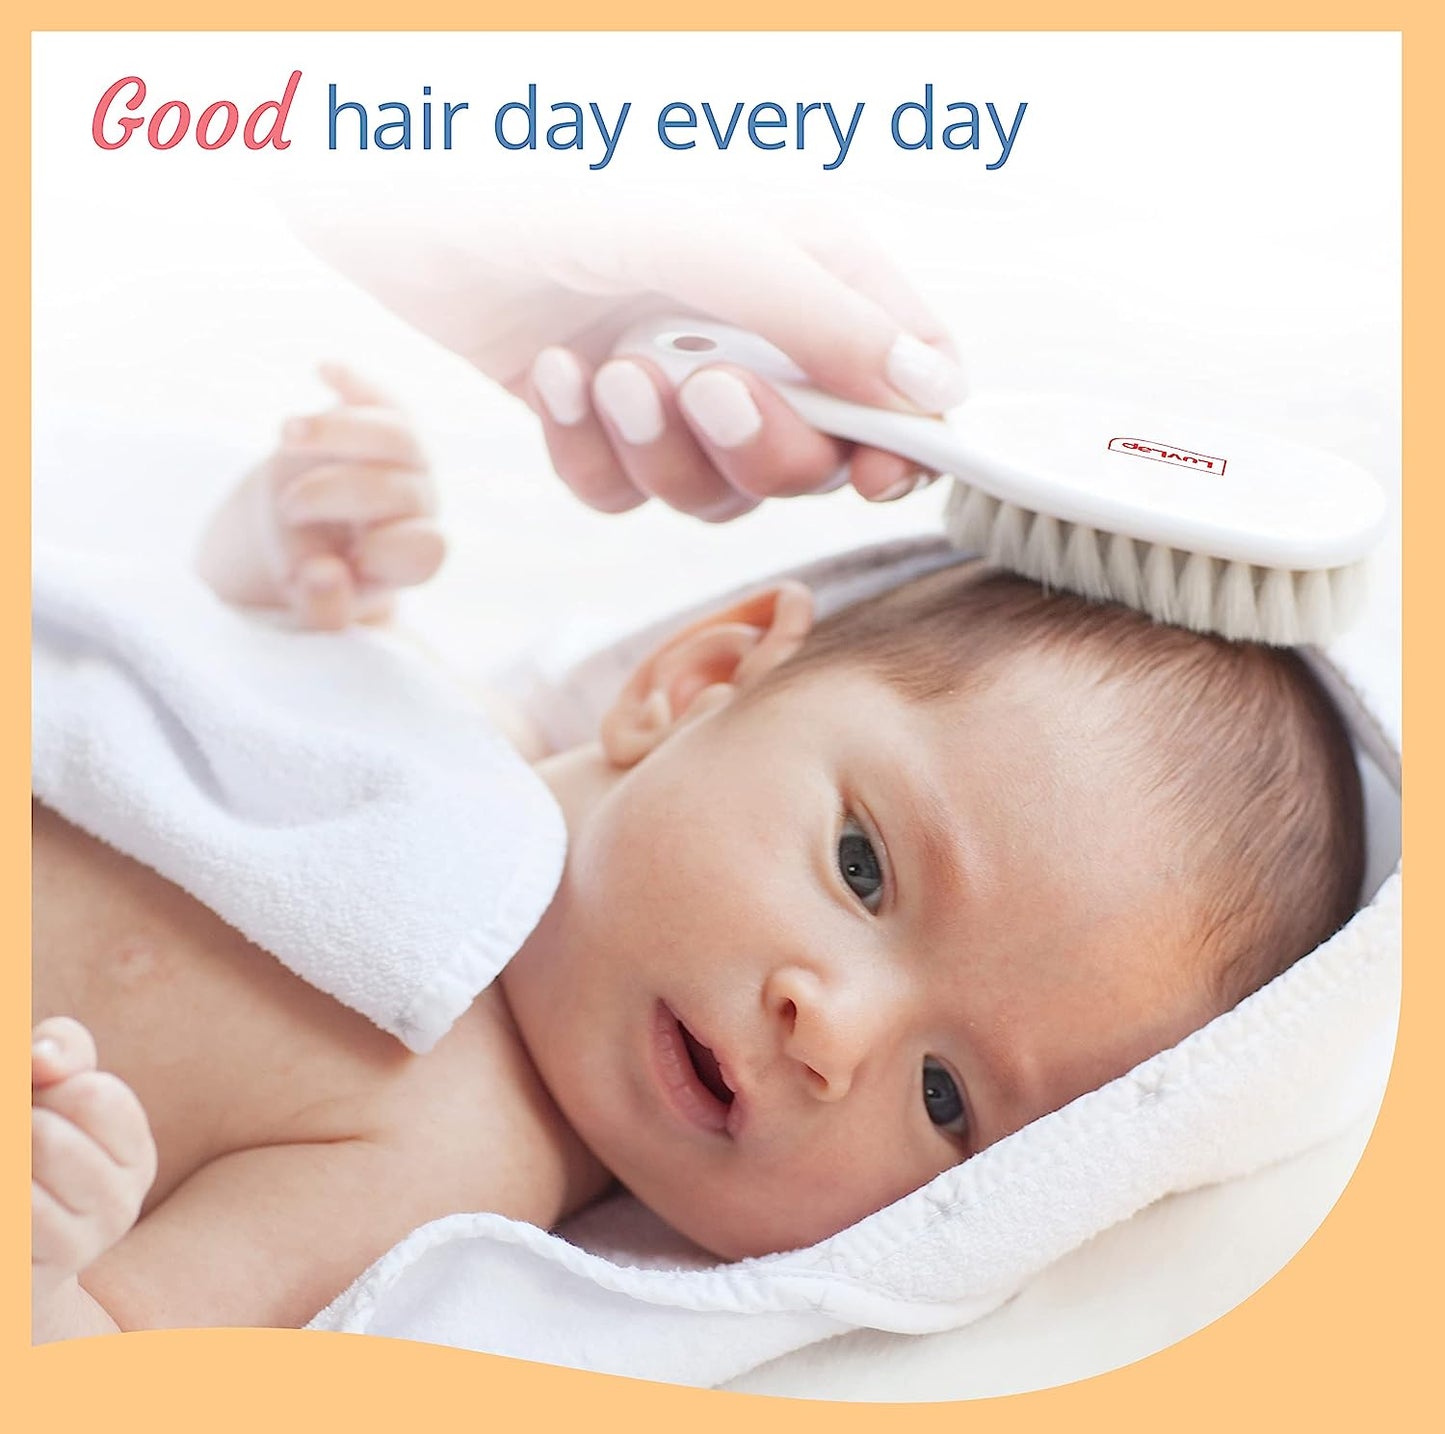 LuvLap Stylish Infant Hair Brush and Comb Kit, Suitable from Birth 0+month baby (White) 18607